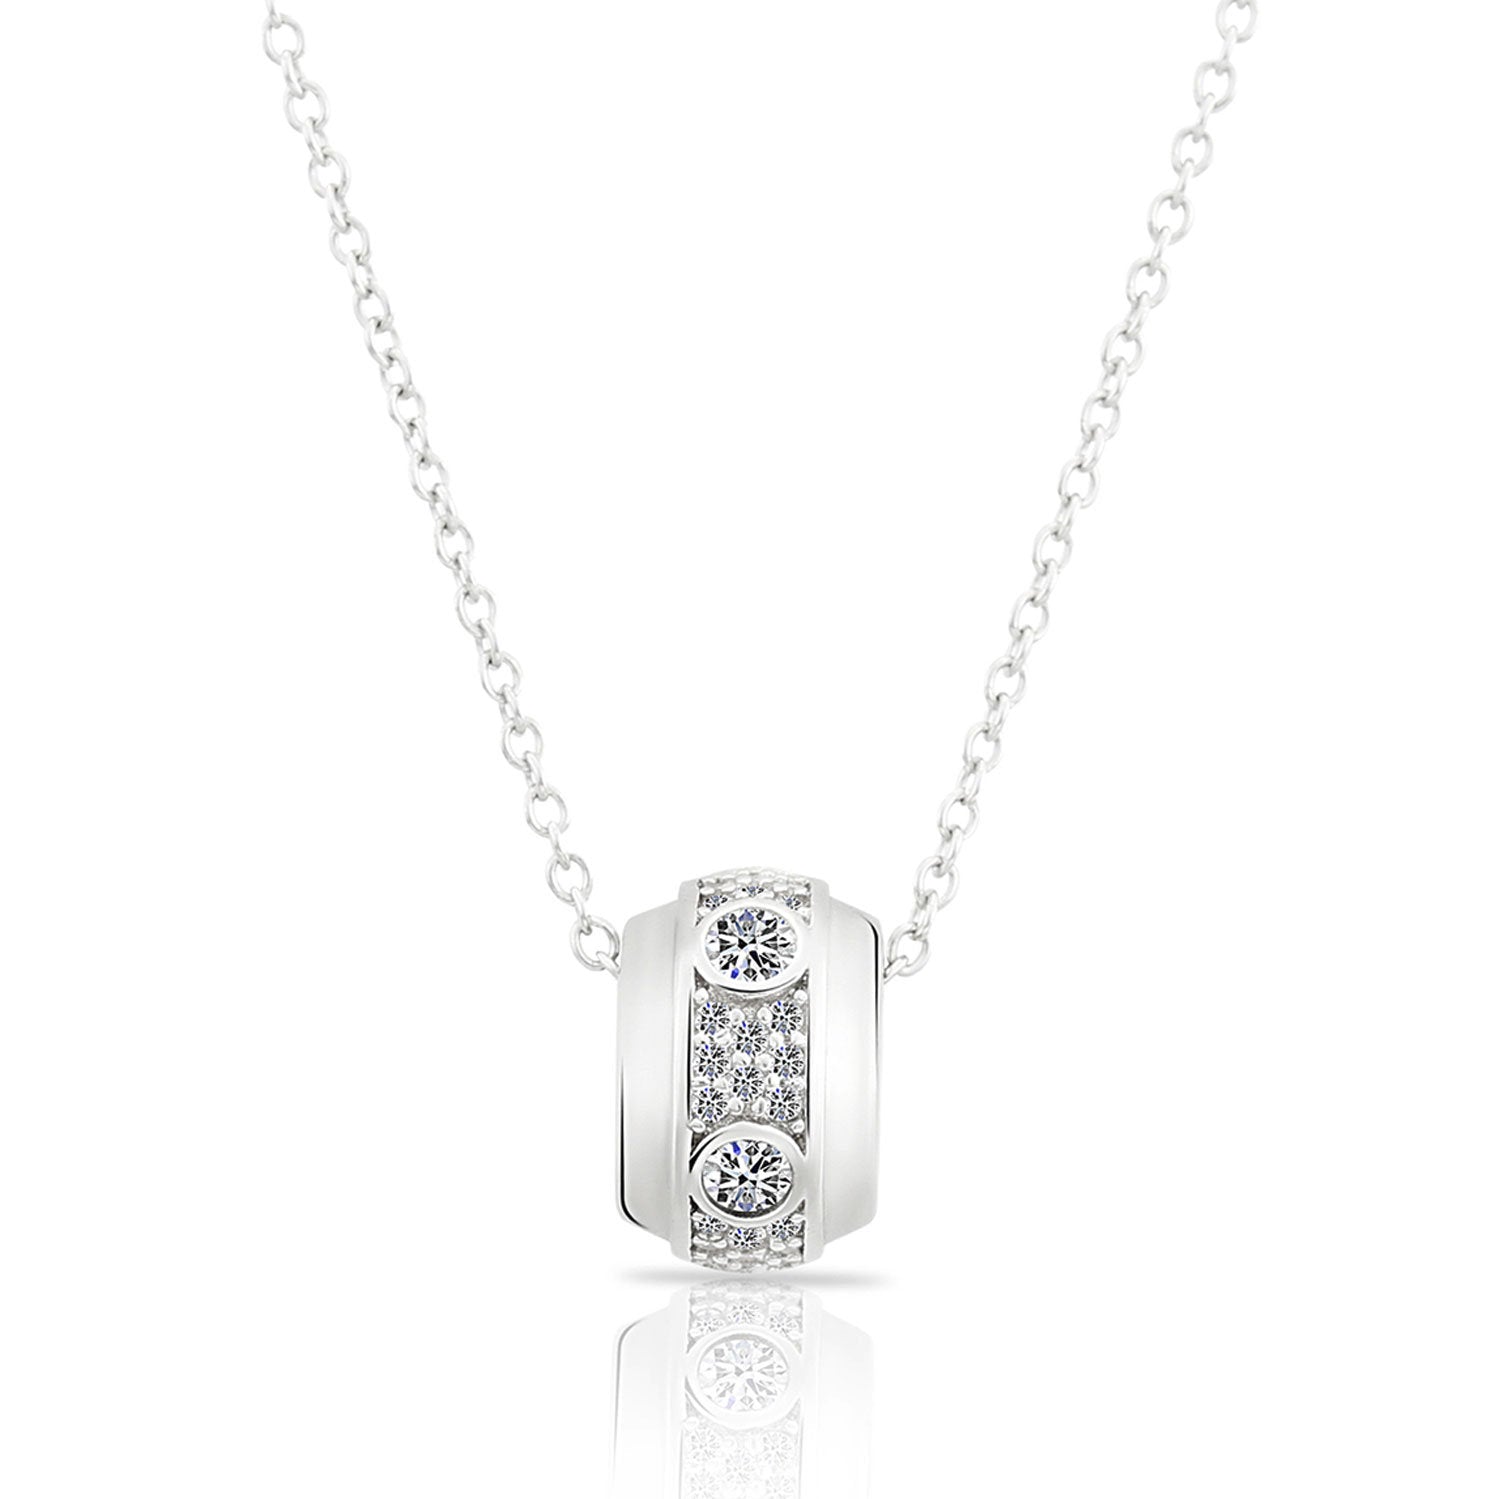 Sterling Silver Round Charm Necklace